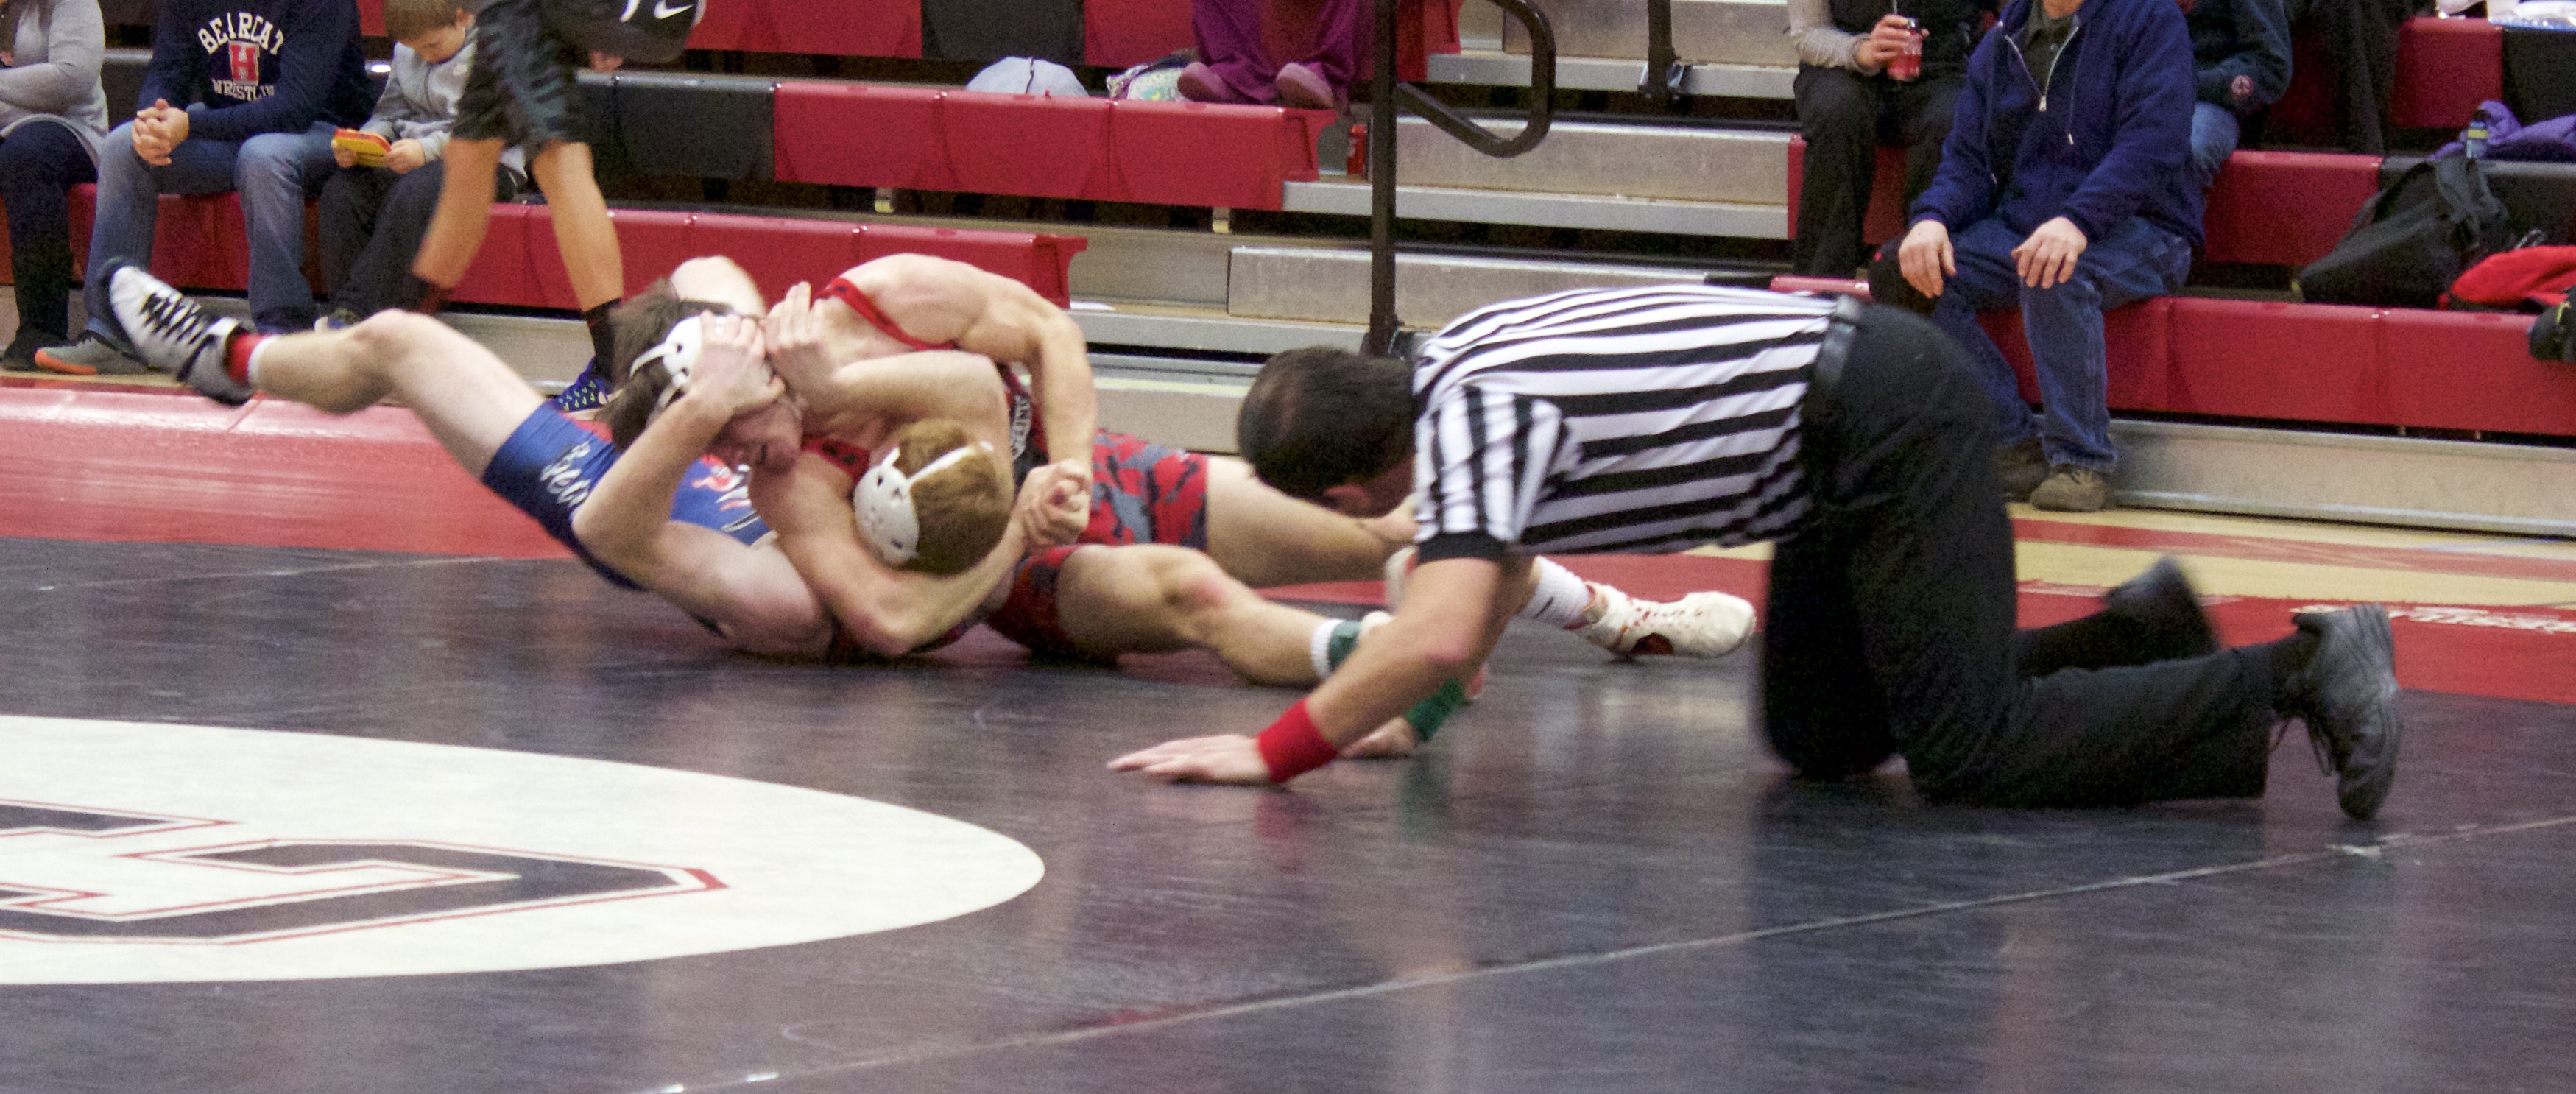 Freshman Luke McGonigal nearly pinned his opponent on Tuesday night. (Photo by HL)